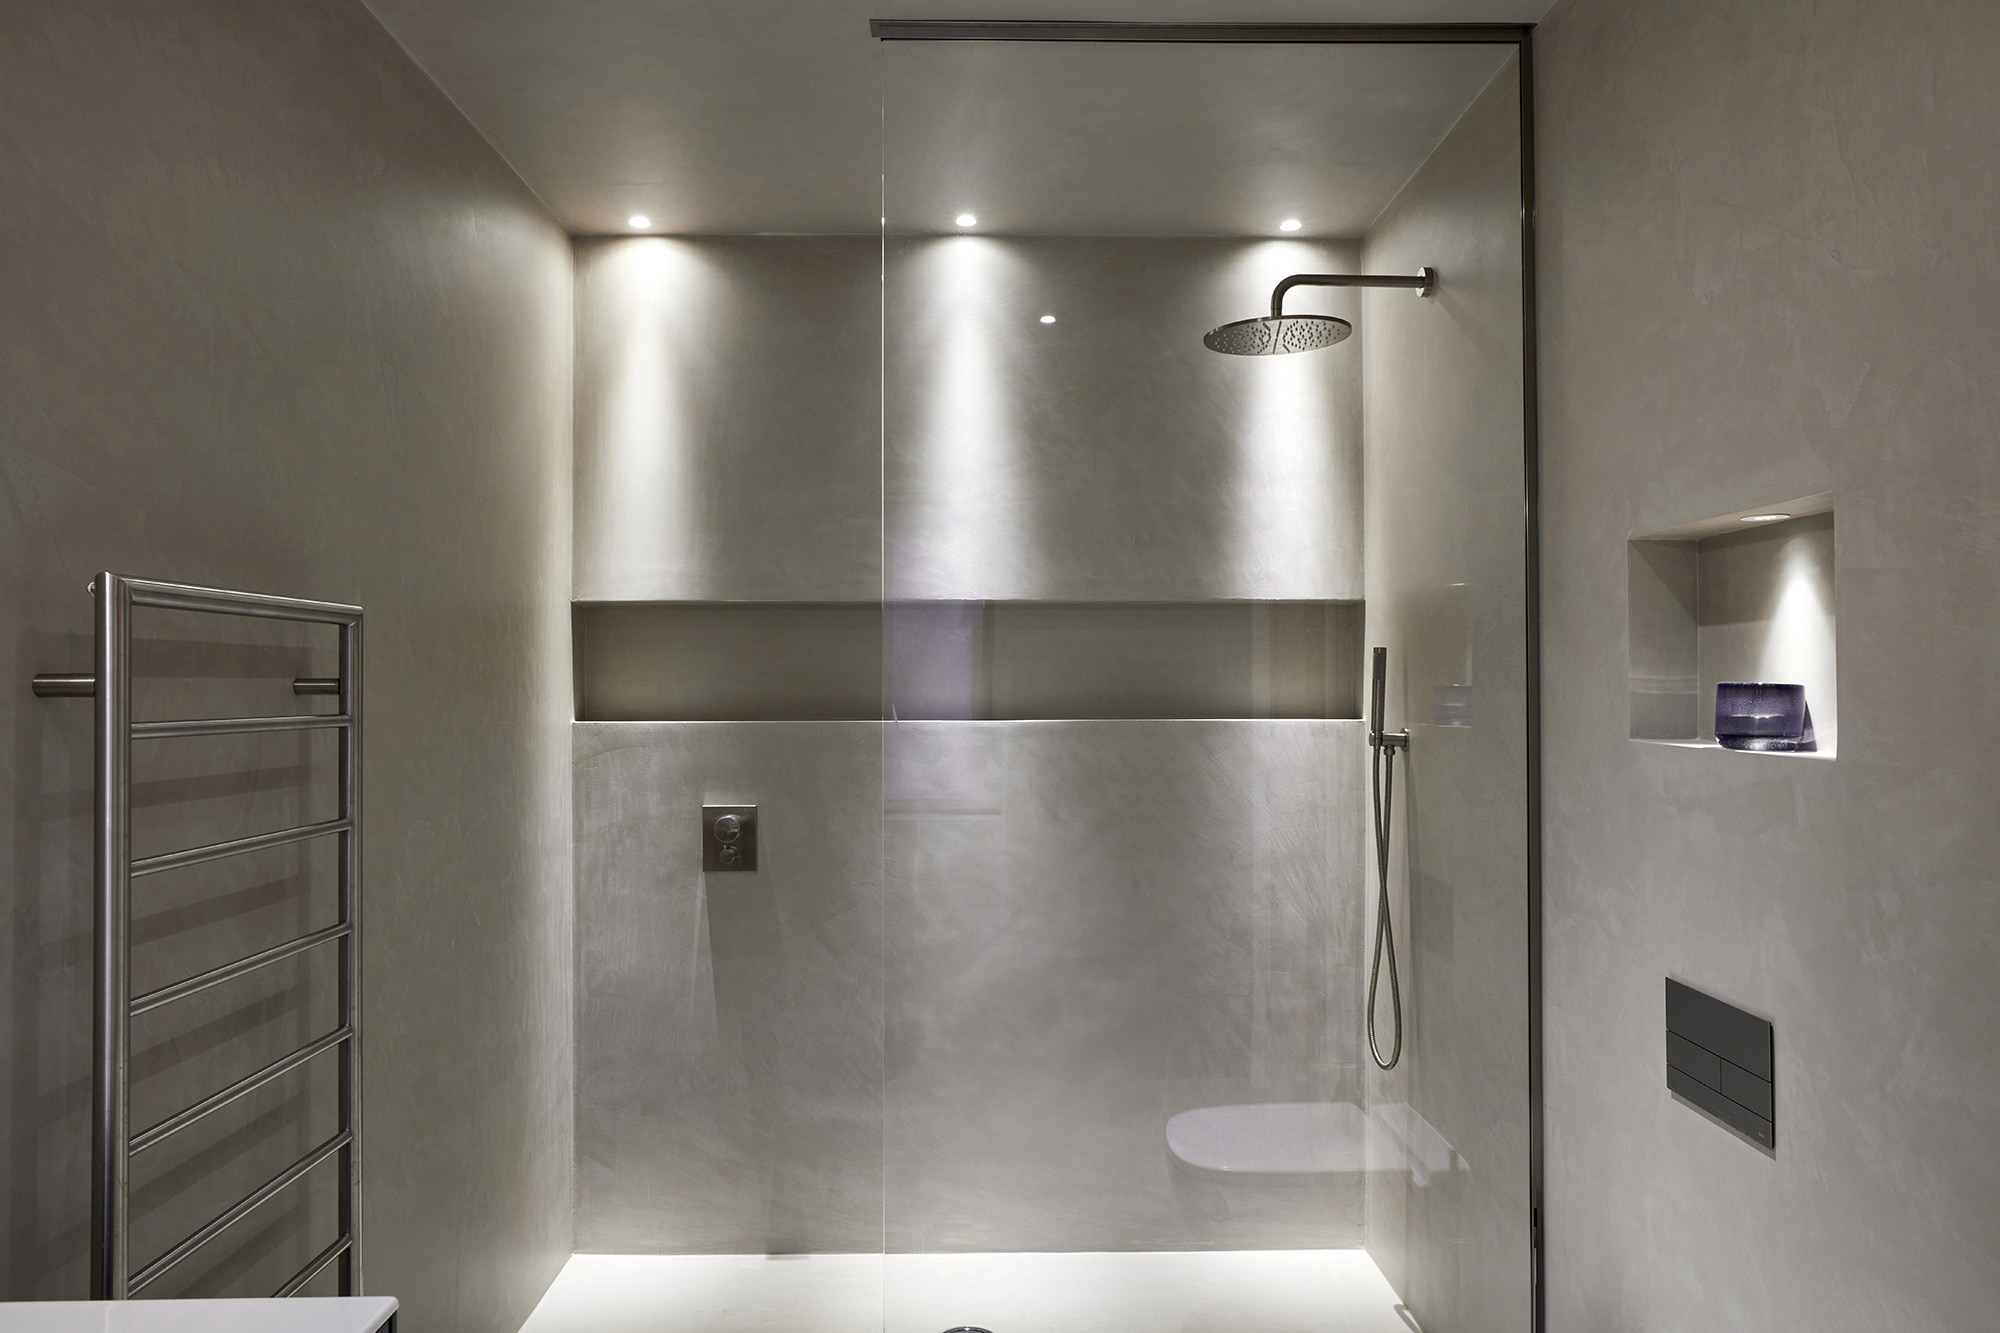 Bathroom shower detail - New build by KM Grant Surrey